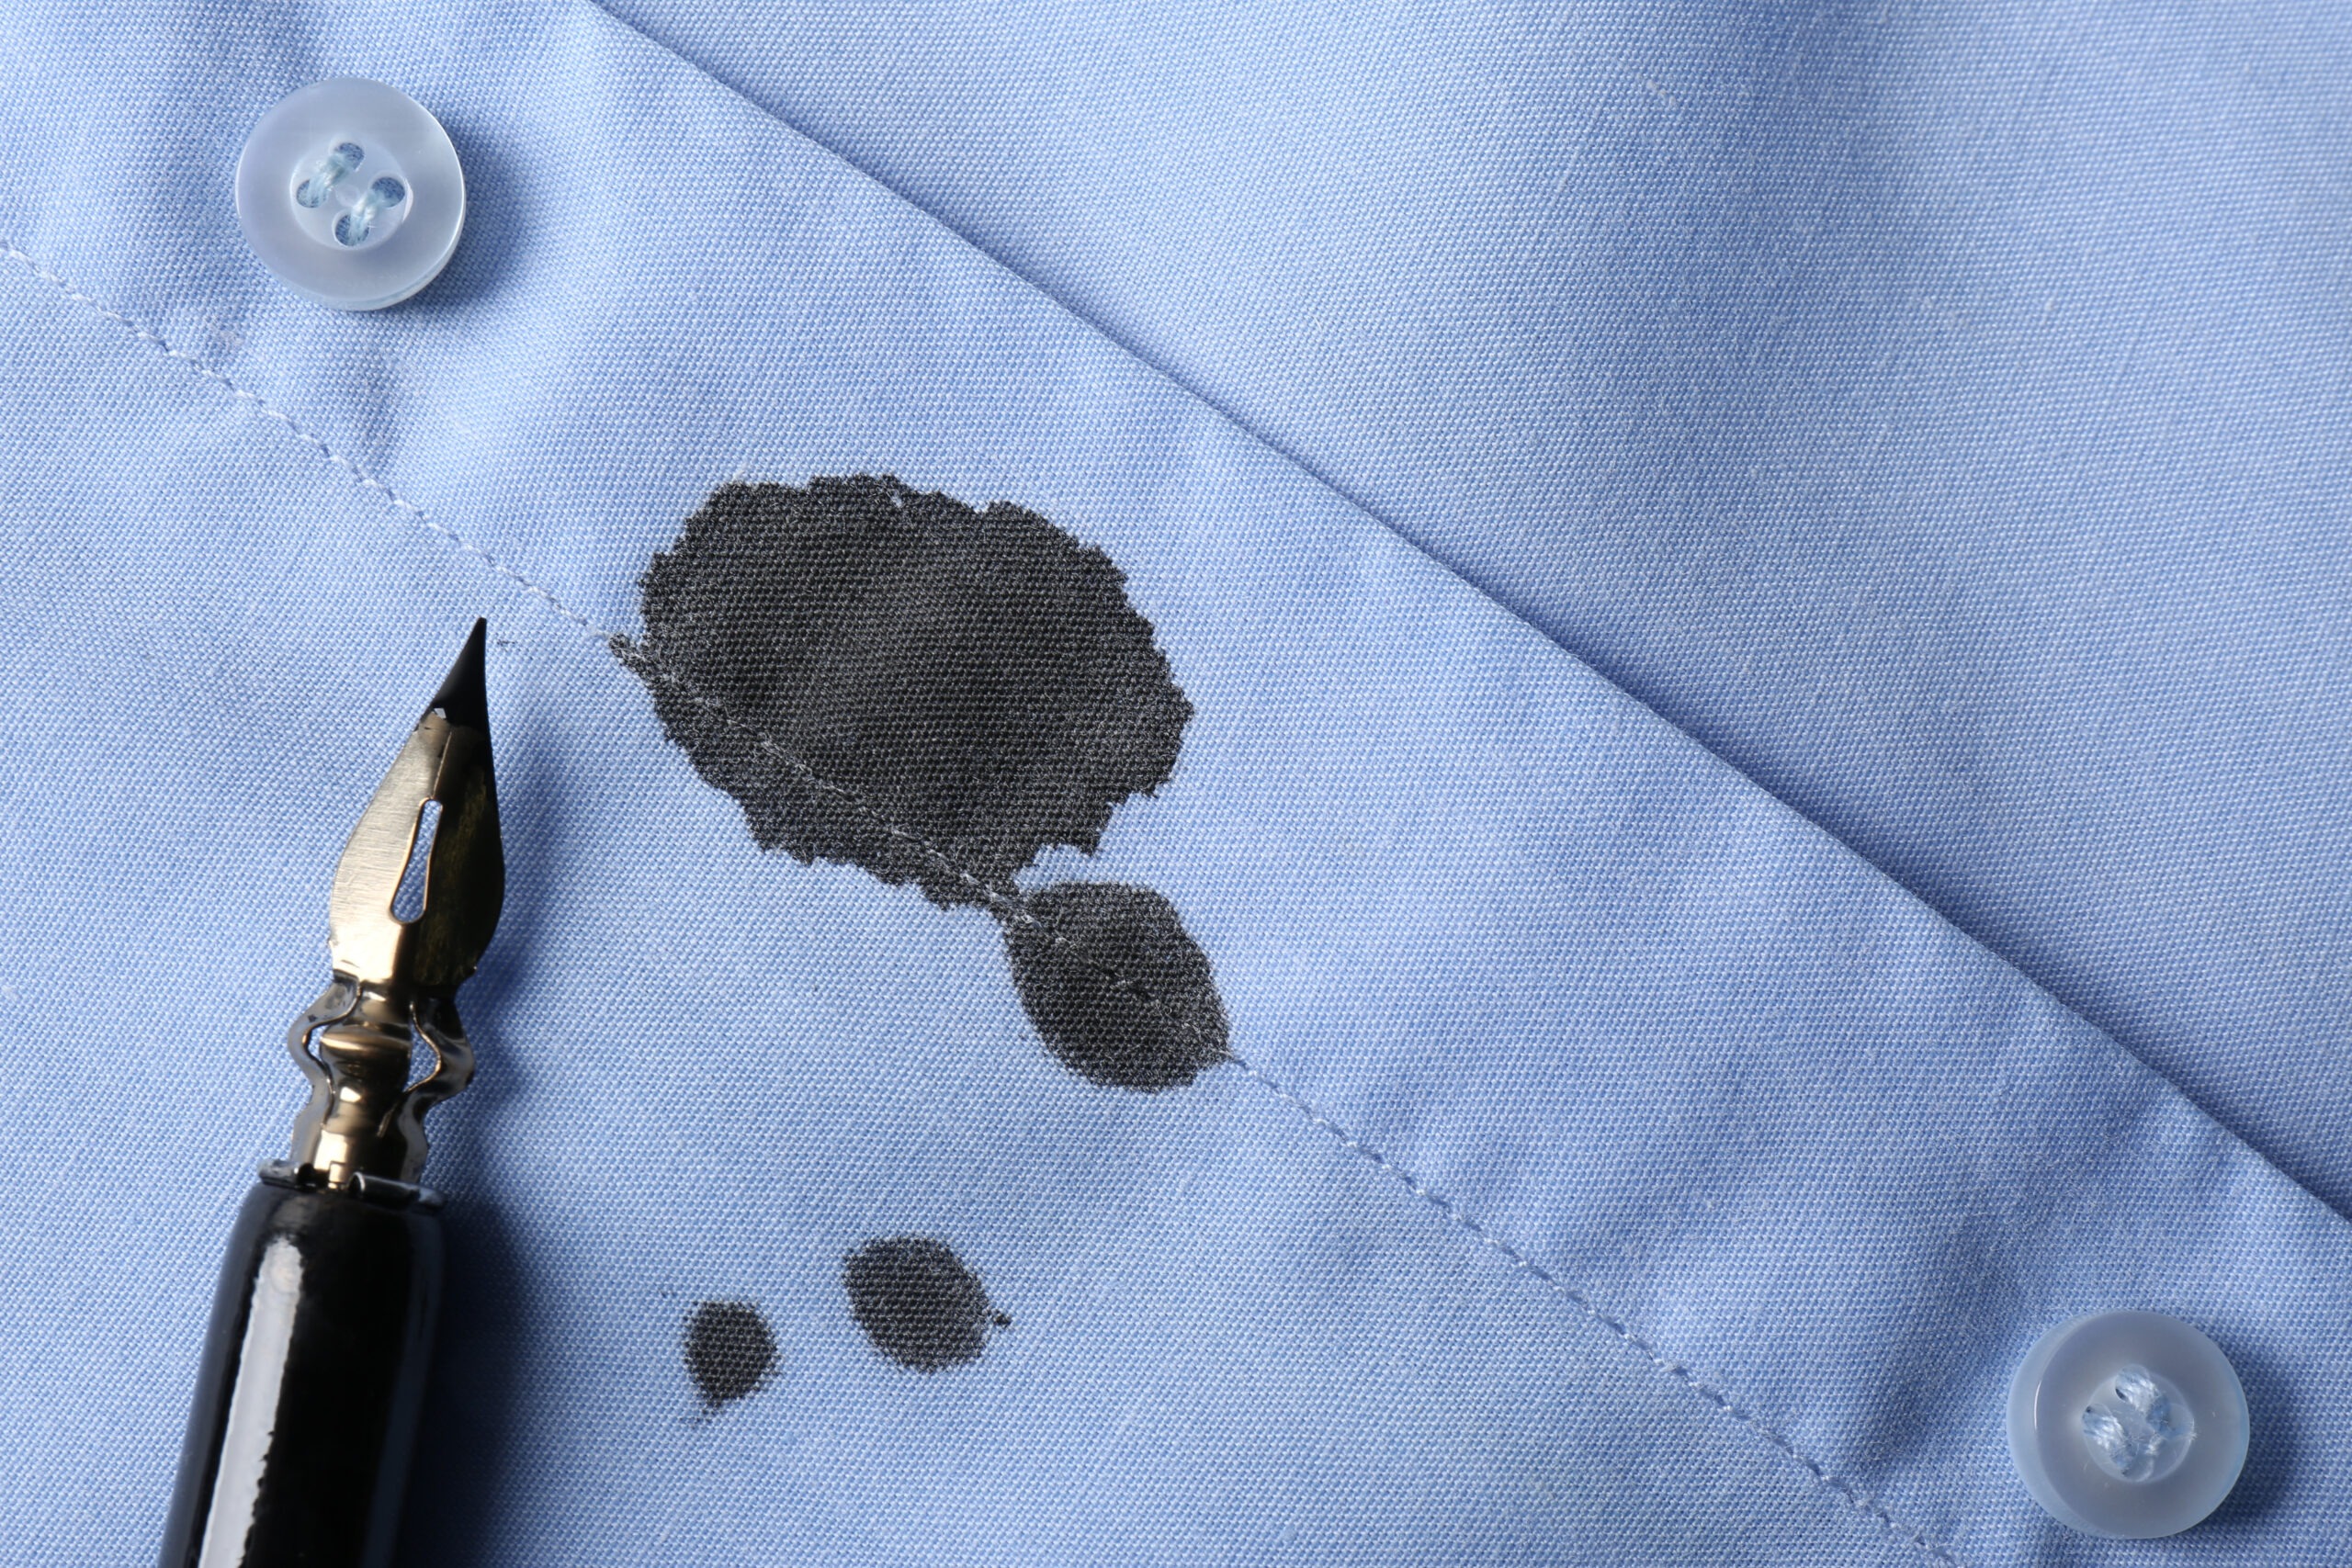 Black ink stain on light blue shirt and pen top view Space for text